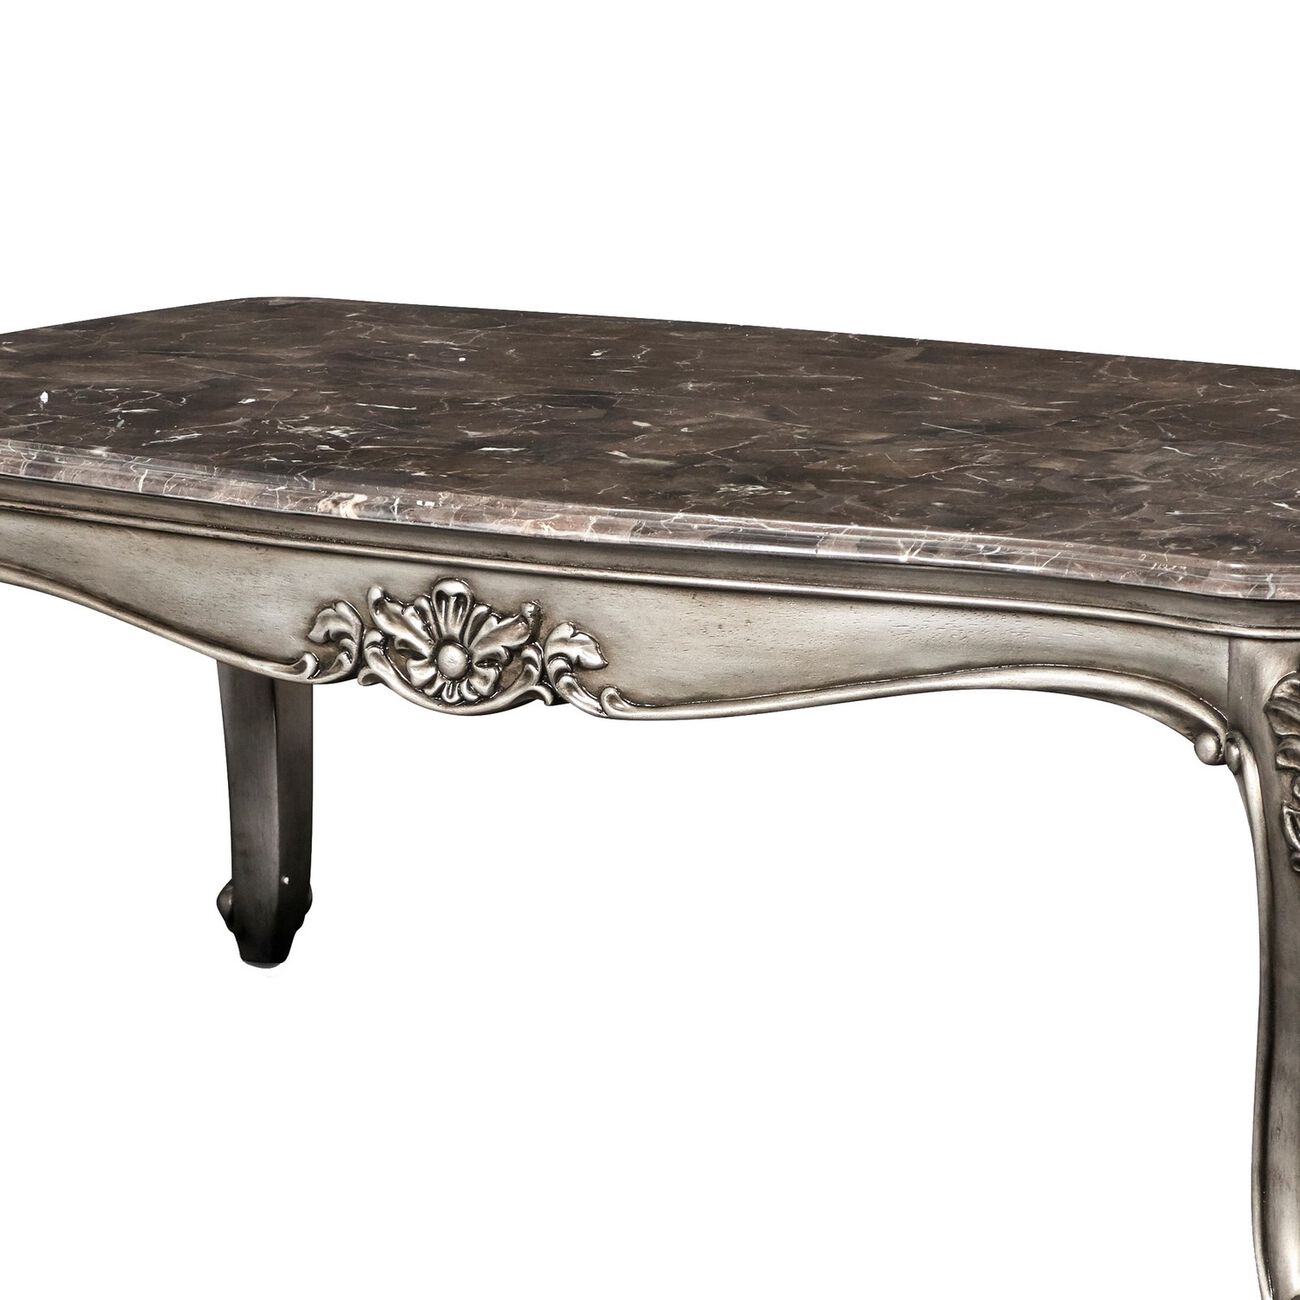 Wooden Cocktail Table with Marble Top and Carved Details, Gray